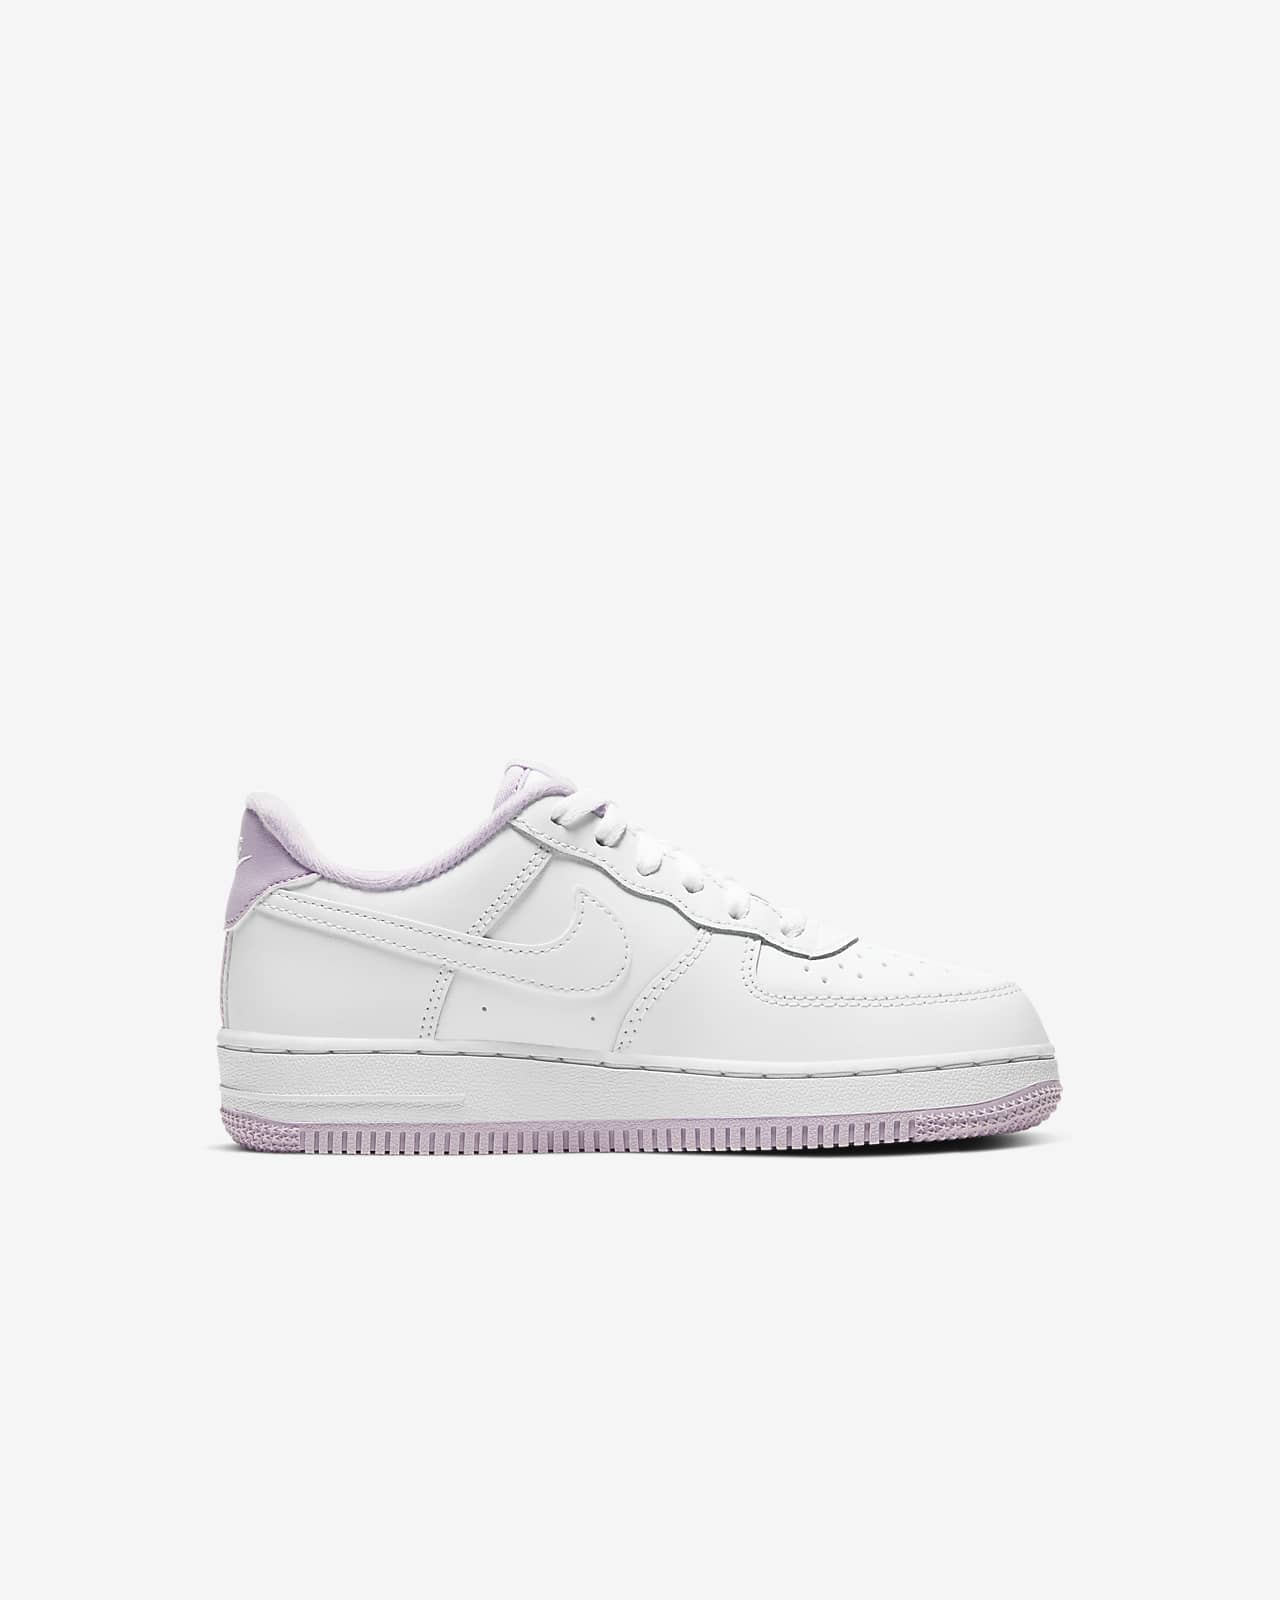 nike air force 1 low white iced lilac